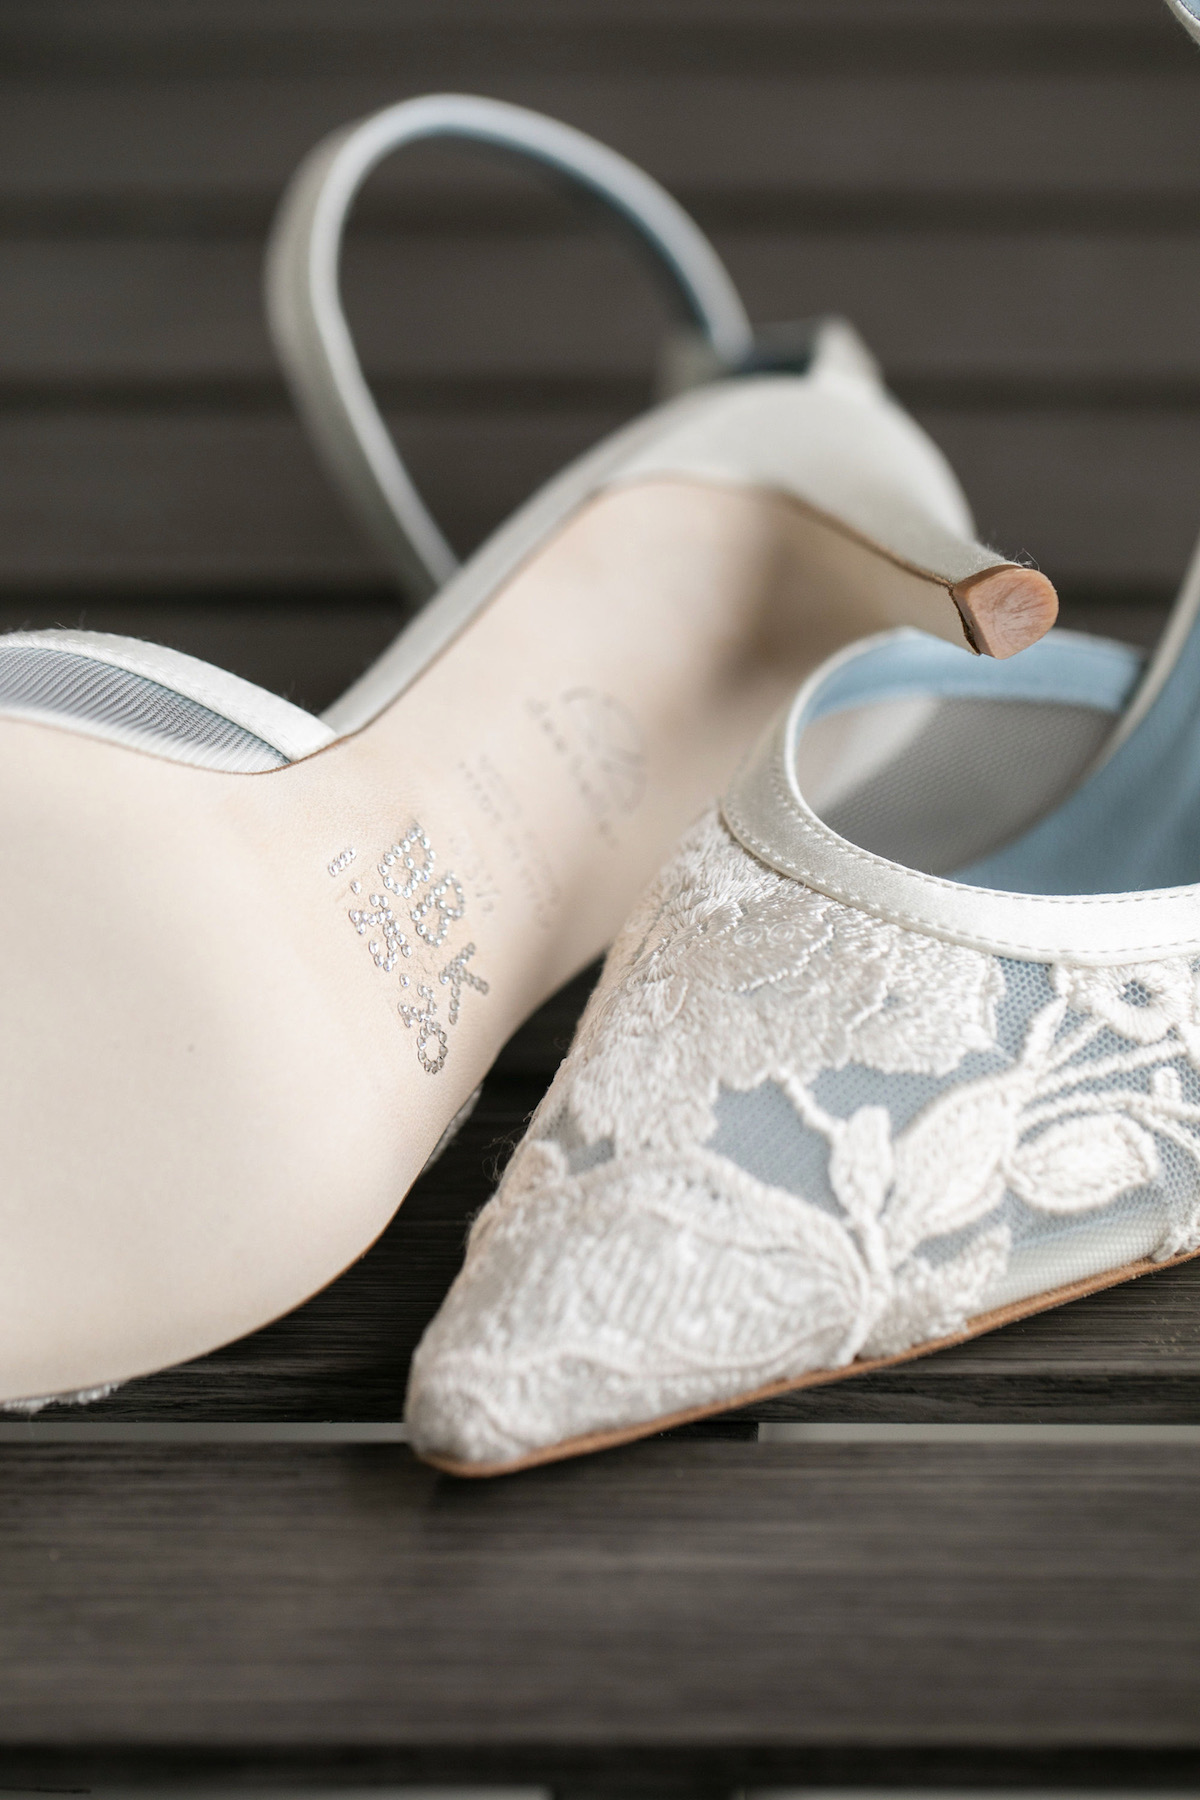 brighton keller wedding shoes with lace